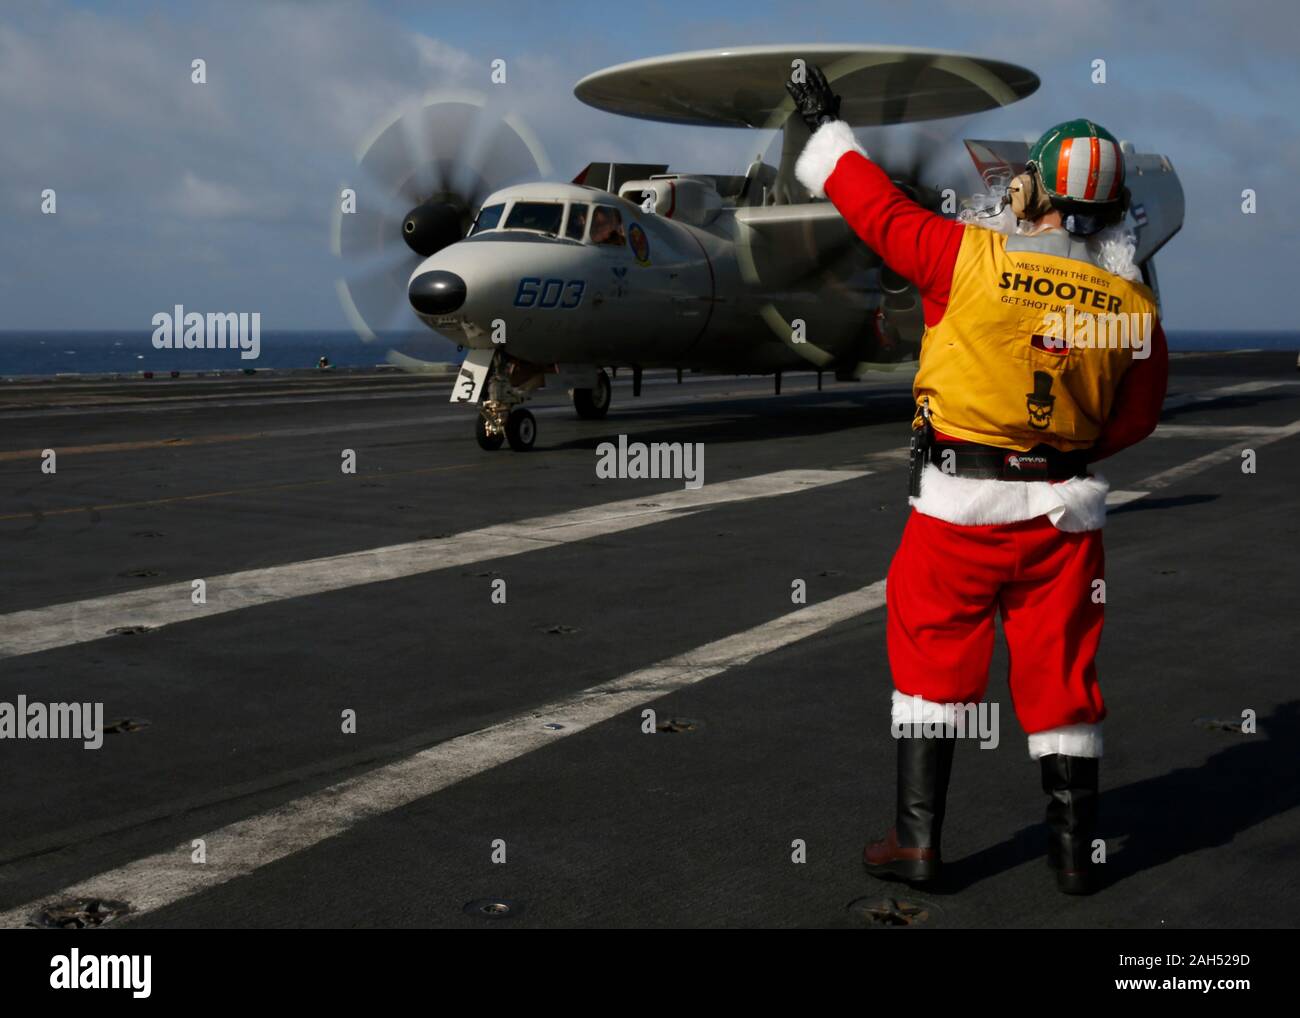 USS Abraham Lincoln, United States. 24 December, 2019. A U.S. Navy sailor dressed as Santa Claus directs an E-2D Hawkeye aircraft on the flight deck of the Nimitz-class aircraft carrier USS Abraham Lincoln during operations on Christmas Eve December 24, 2019 in the South China Sea.  Credit: Amber Smalley/U.S. Navy/Alamy Live News Stock Photo